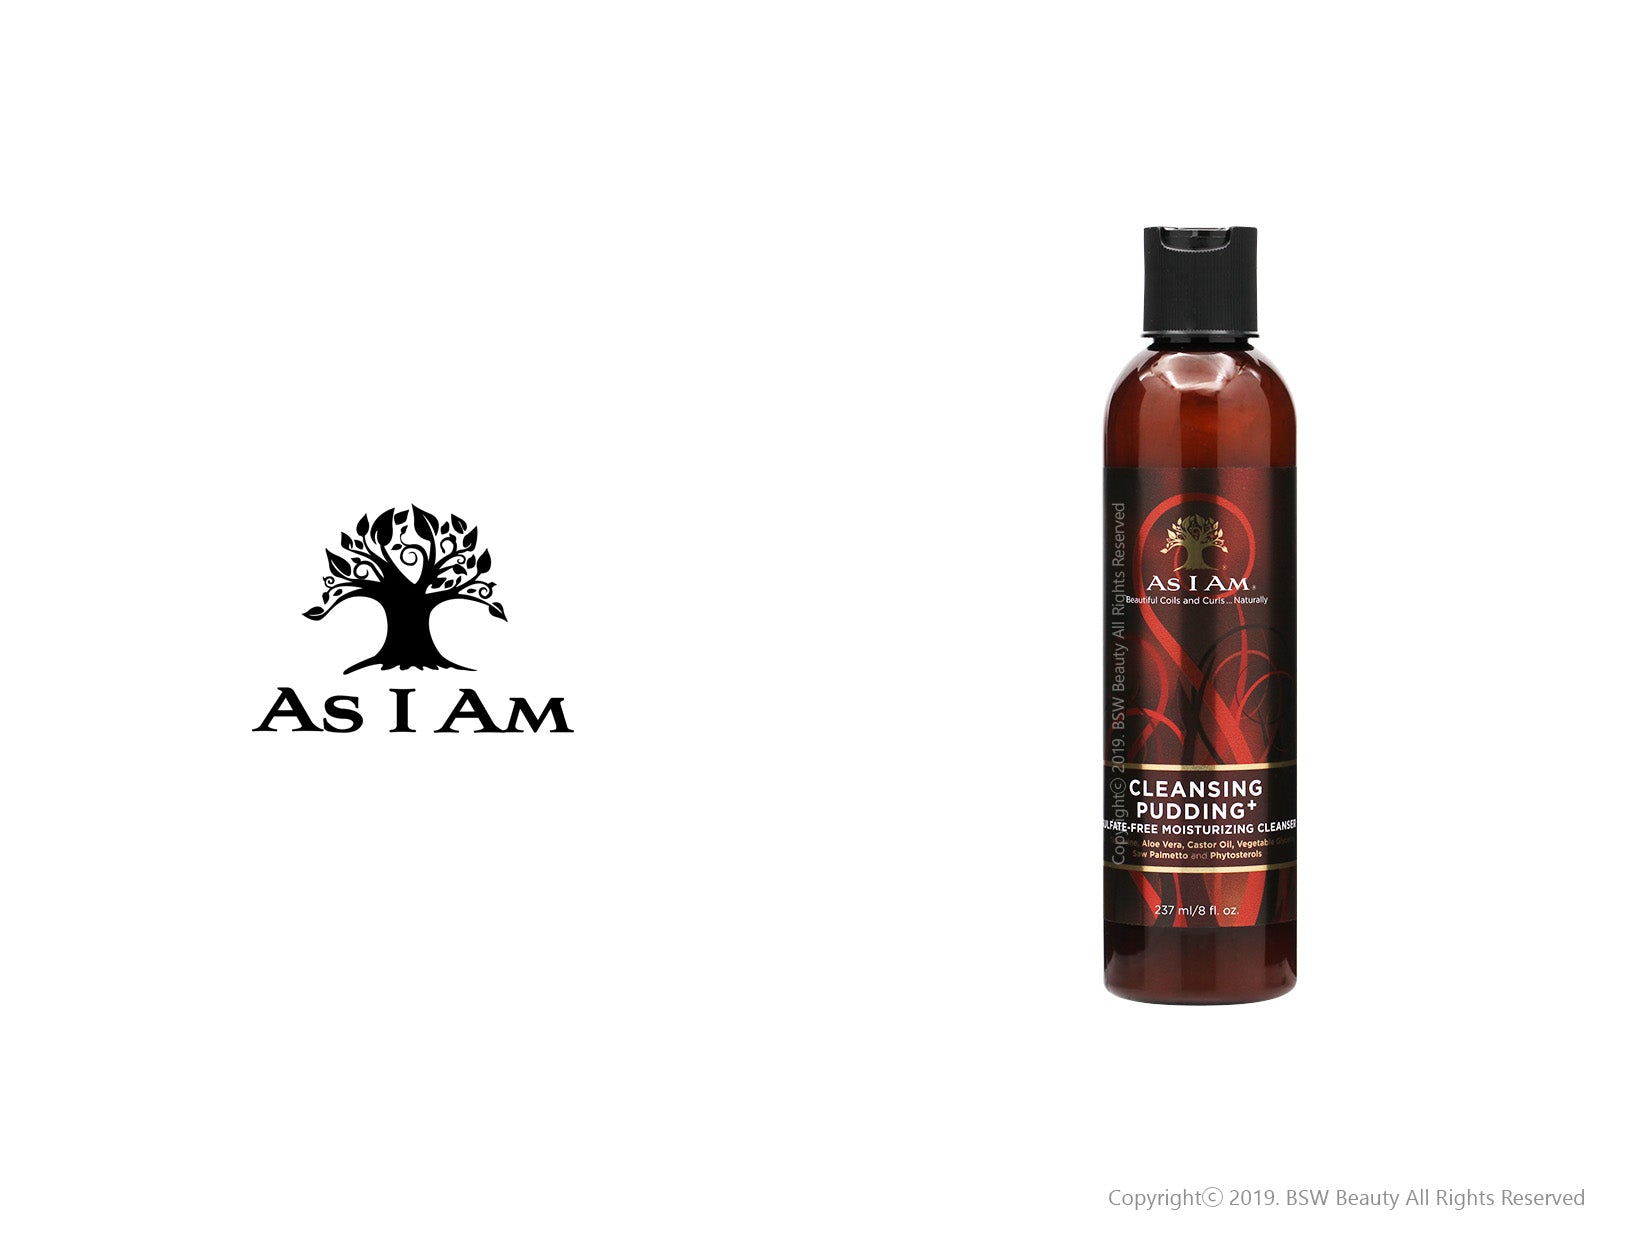 AS I AM CLEANSING PUDDING+ SULFATE FREE MOISTURIZING CLEANSER 8oz